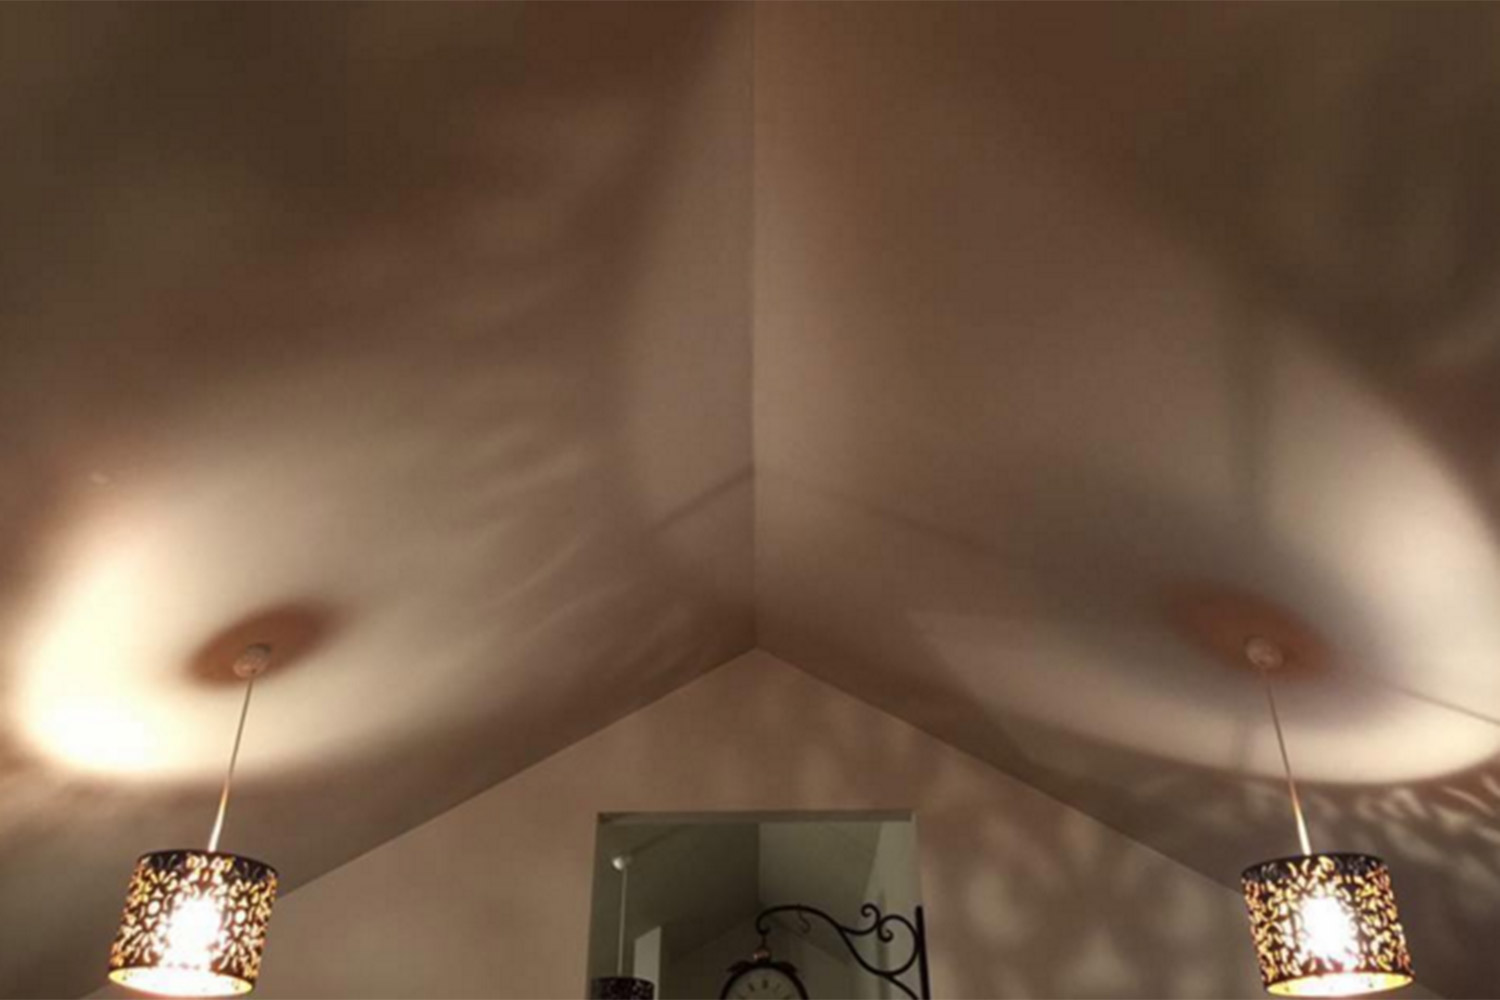 2 ceiling lights that look like boobs